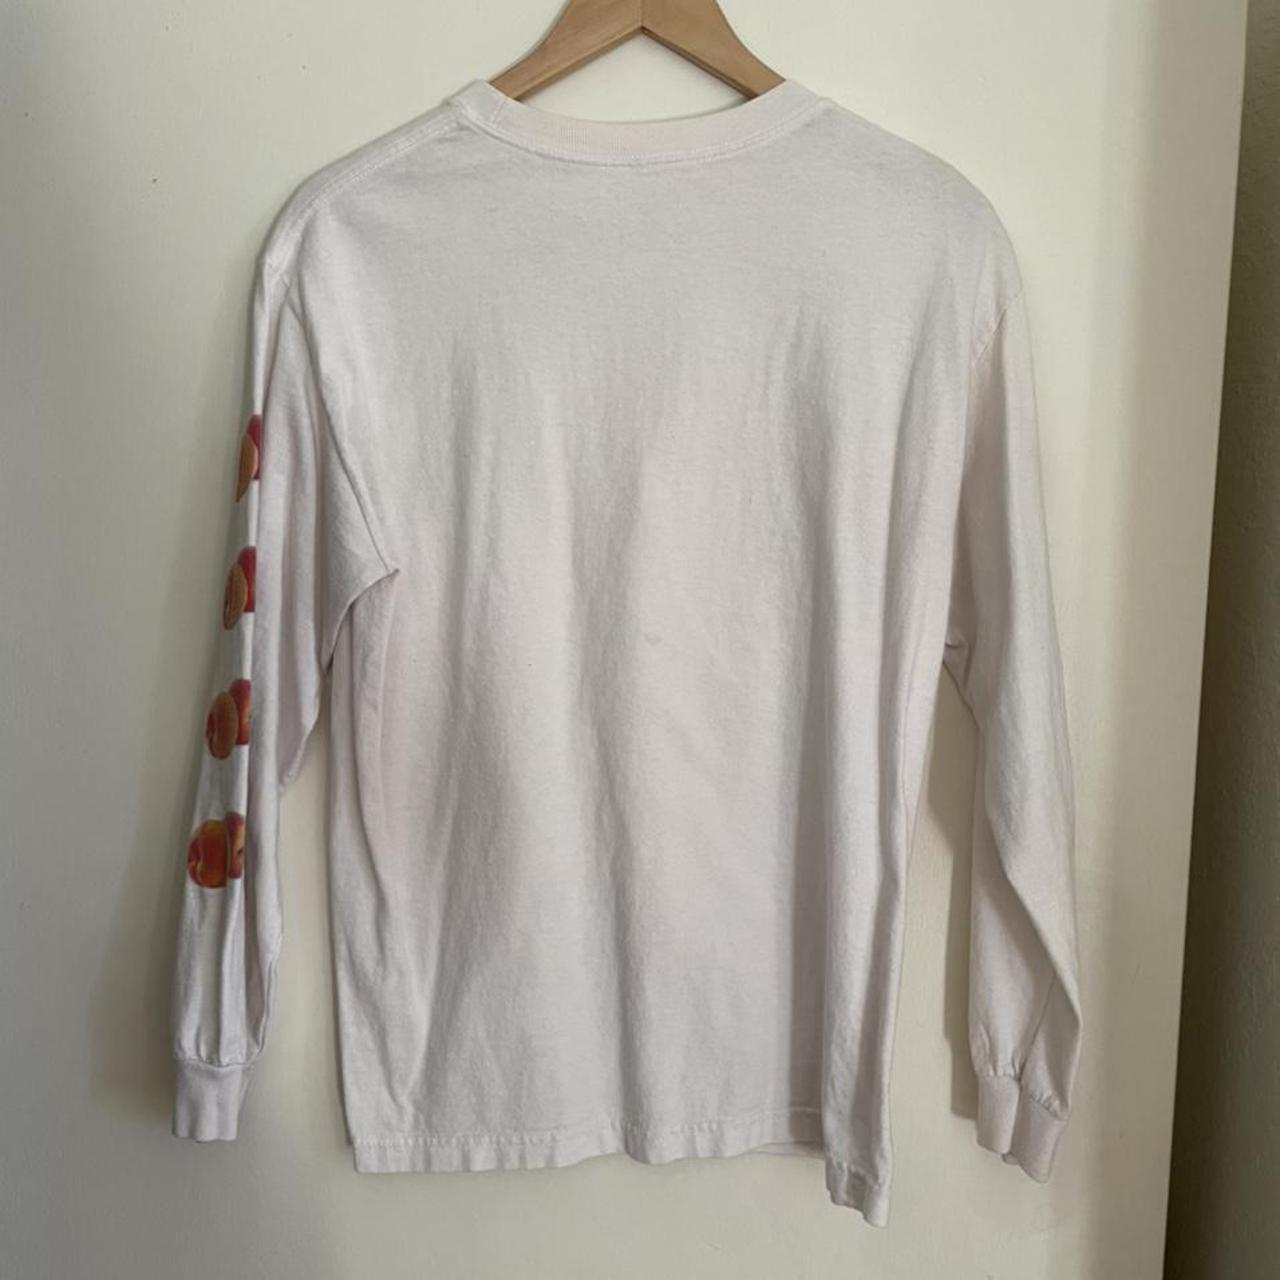 Product Image 2 - Alltimers Peachy Long Sleeve Tee

Bought